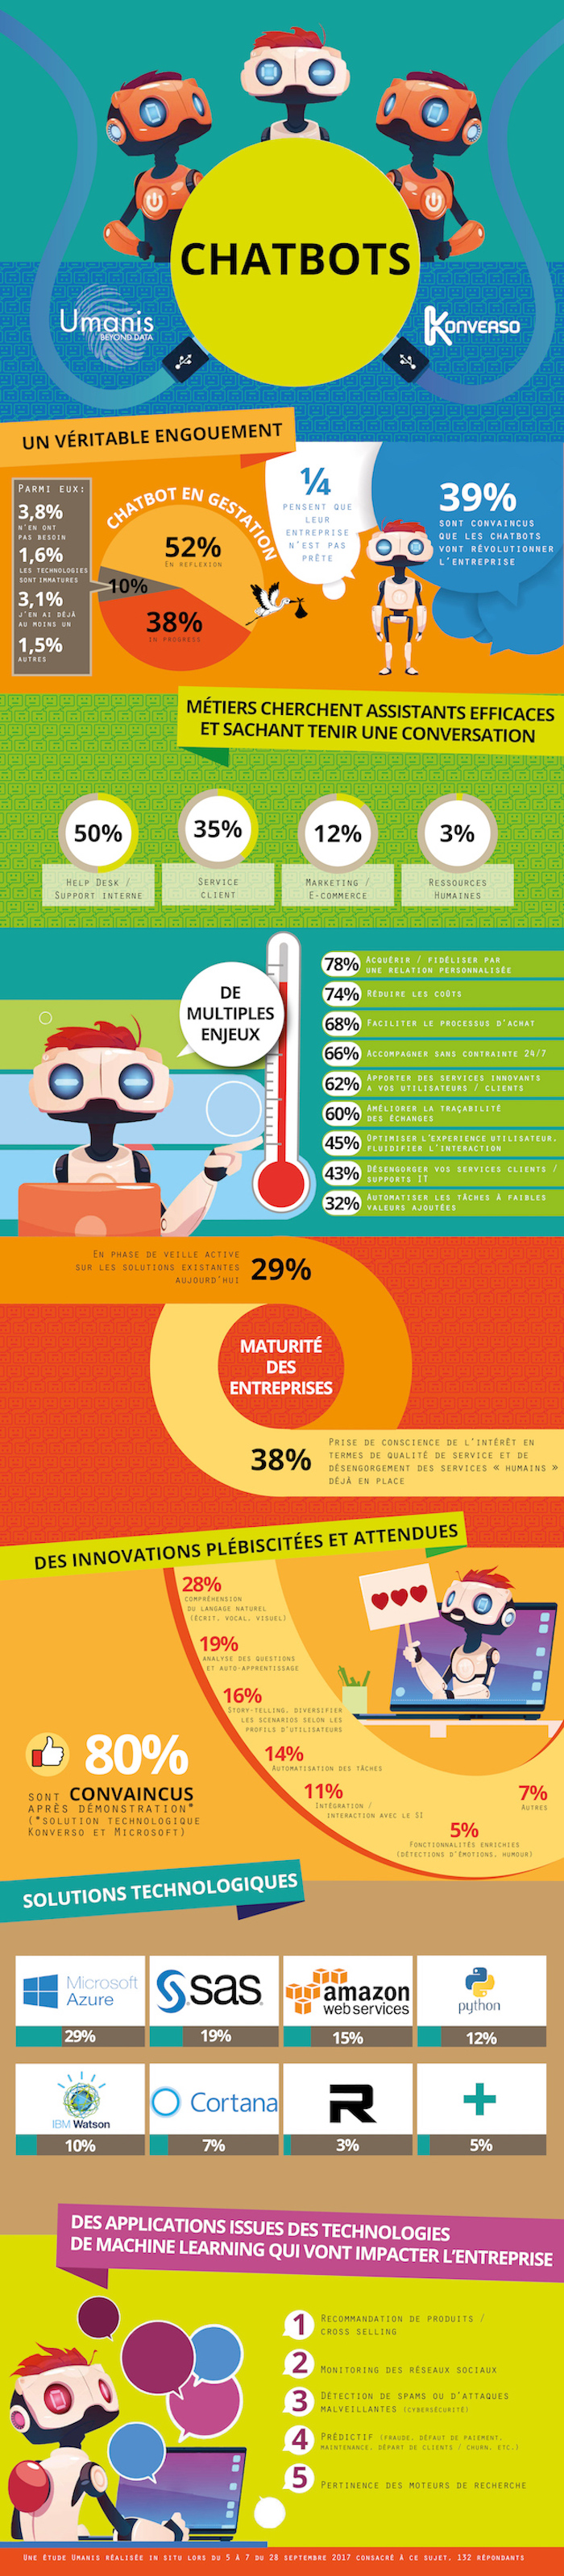 infographie-chatbots-01-01-01